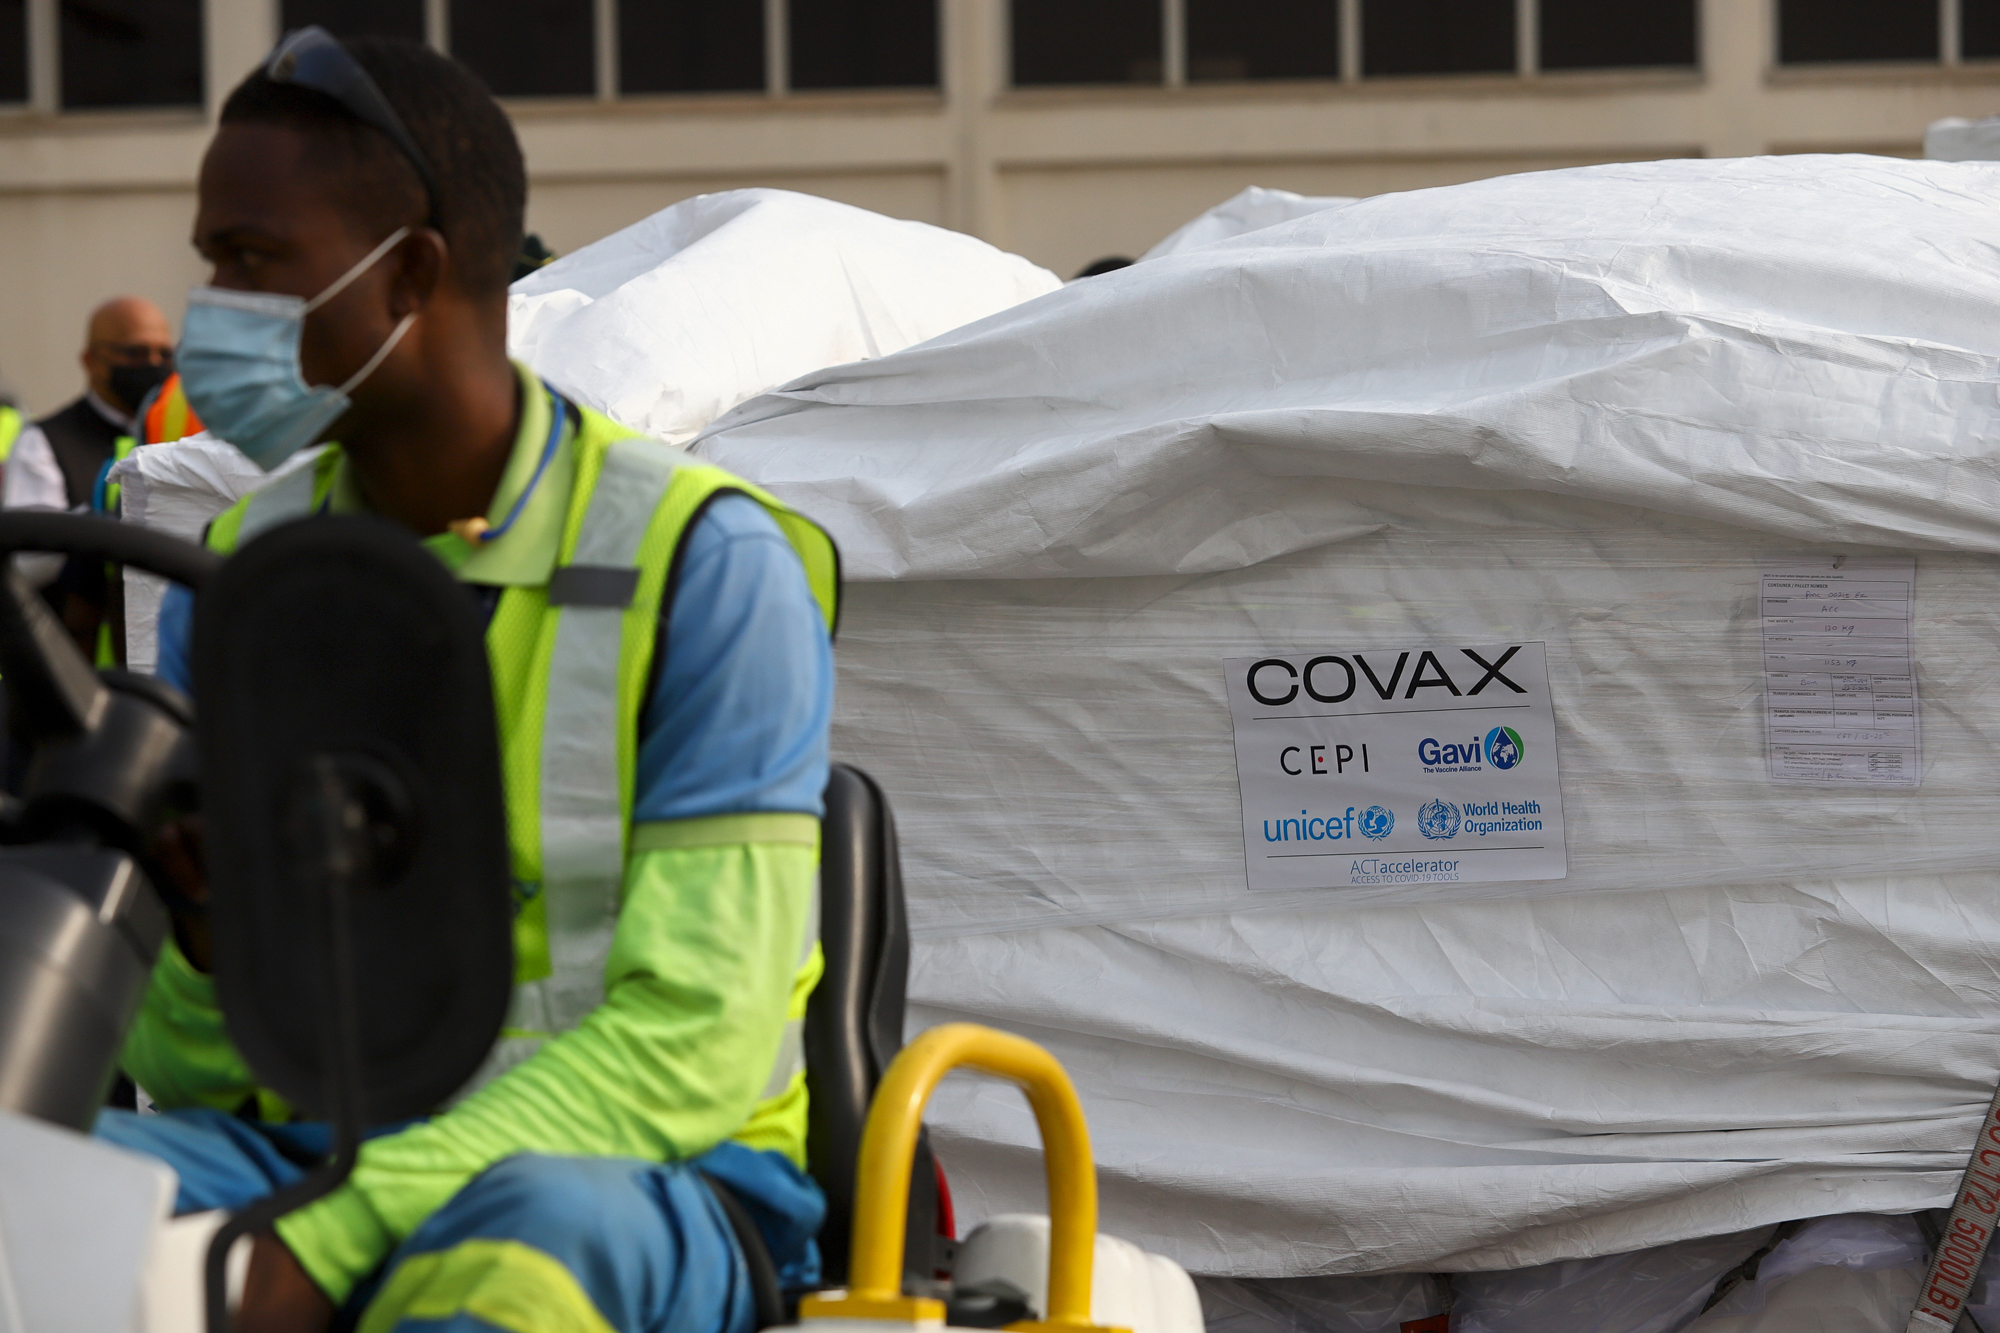 Vaccination programmes have been slow to get off the ground in Africa, but the start of the Covax initiative has helped facilitate things